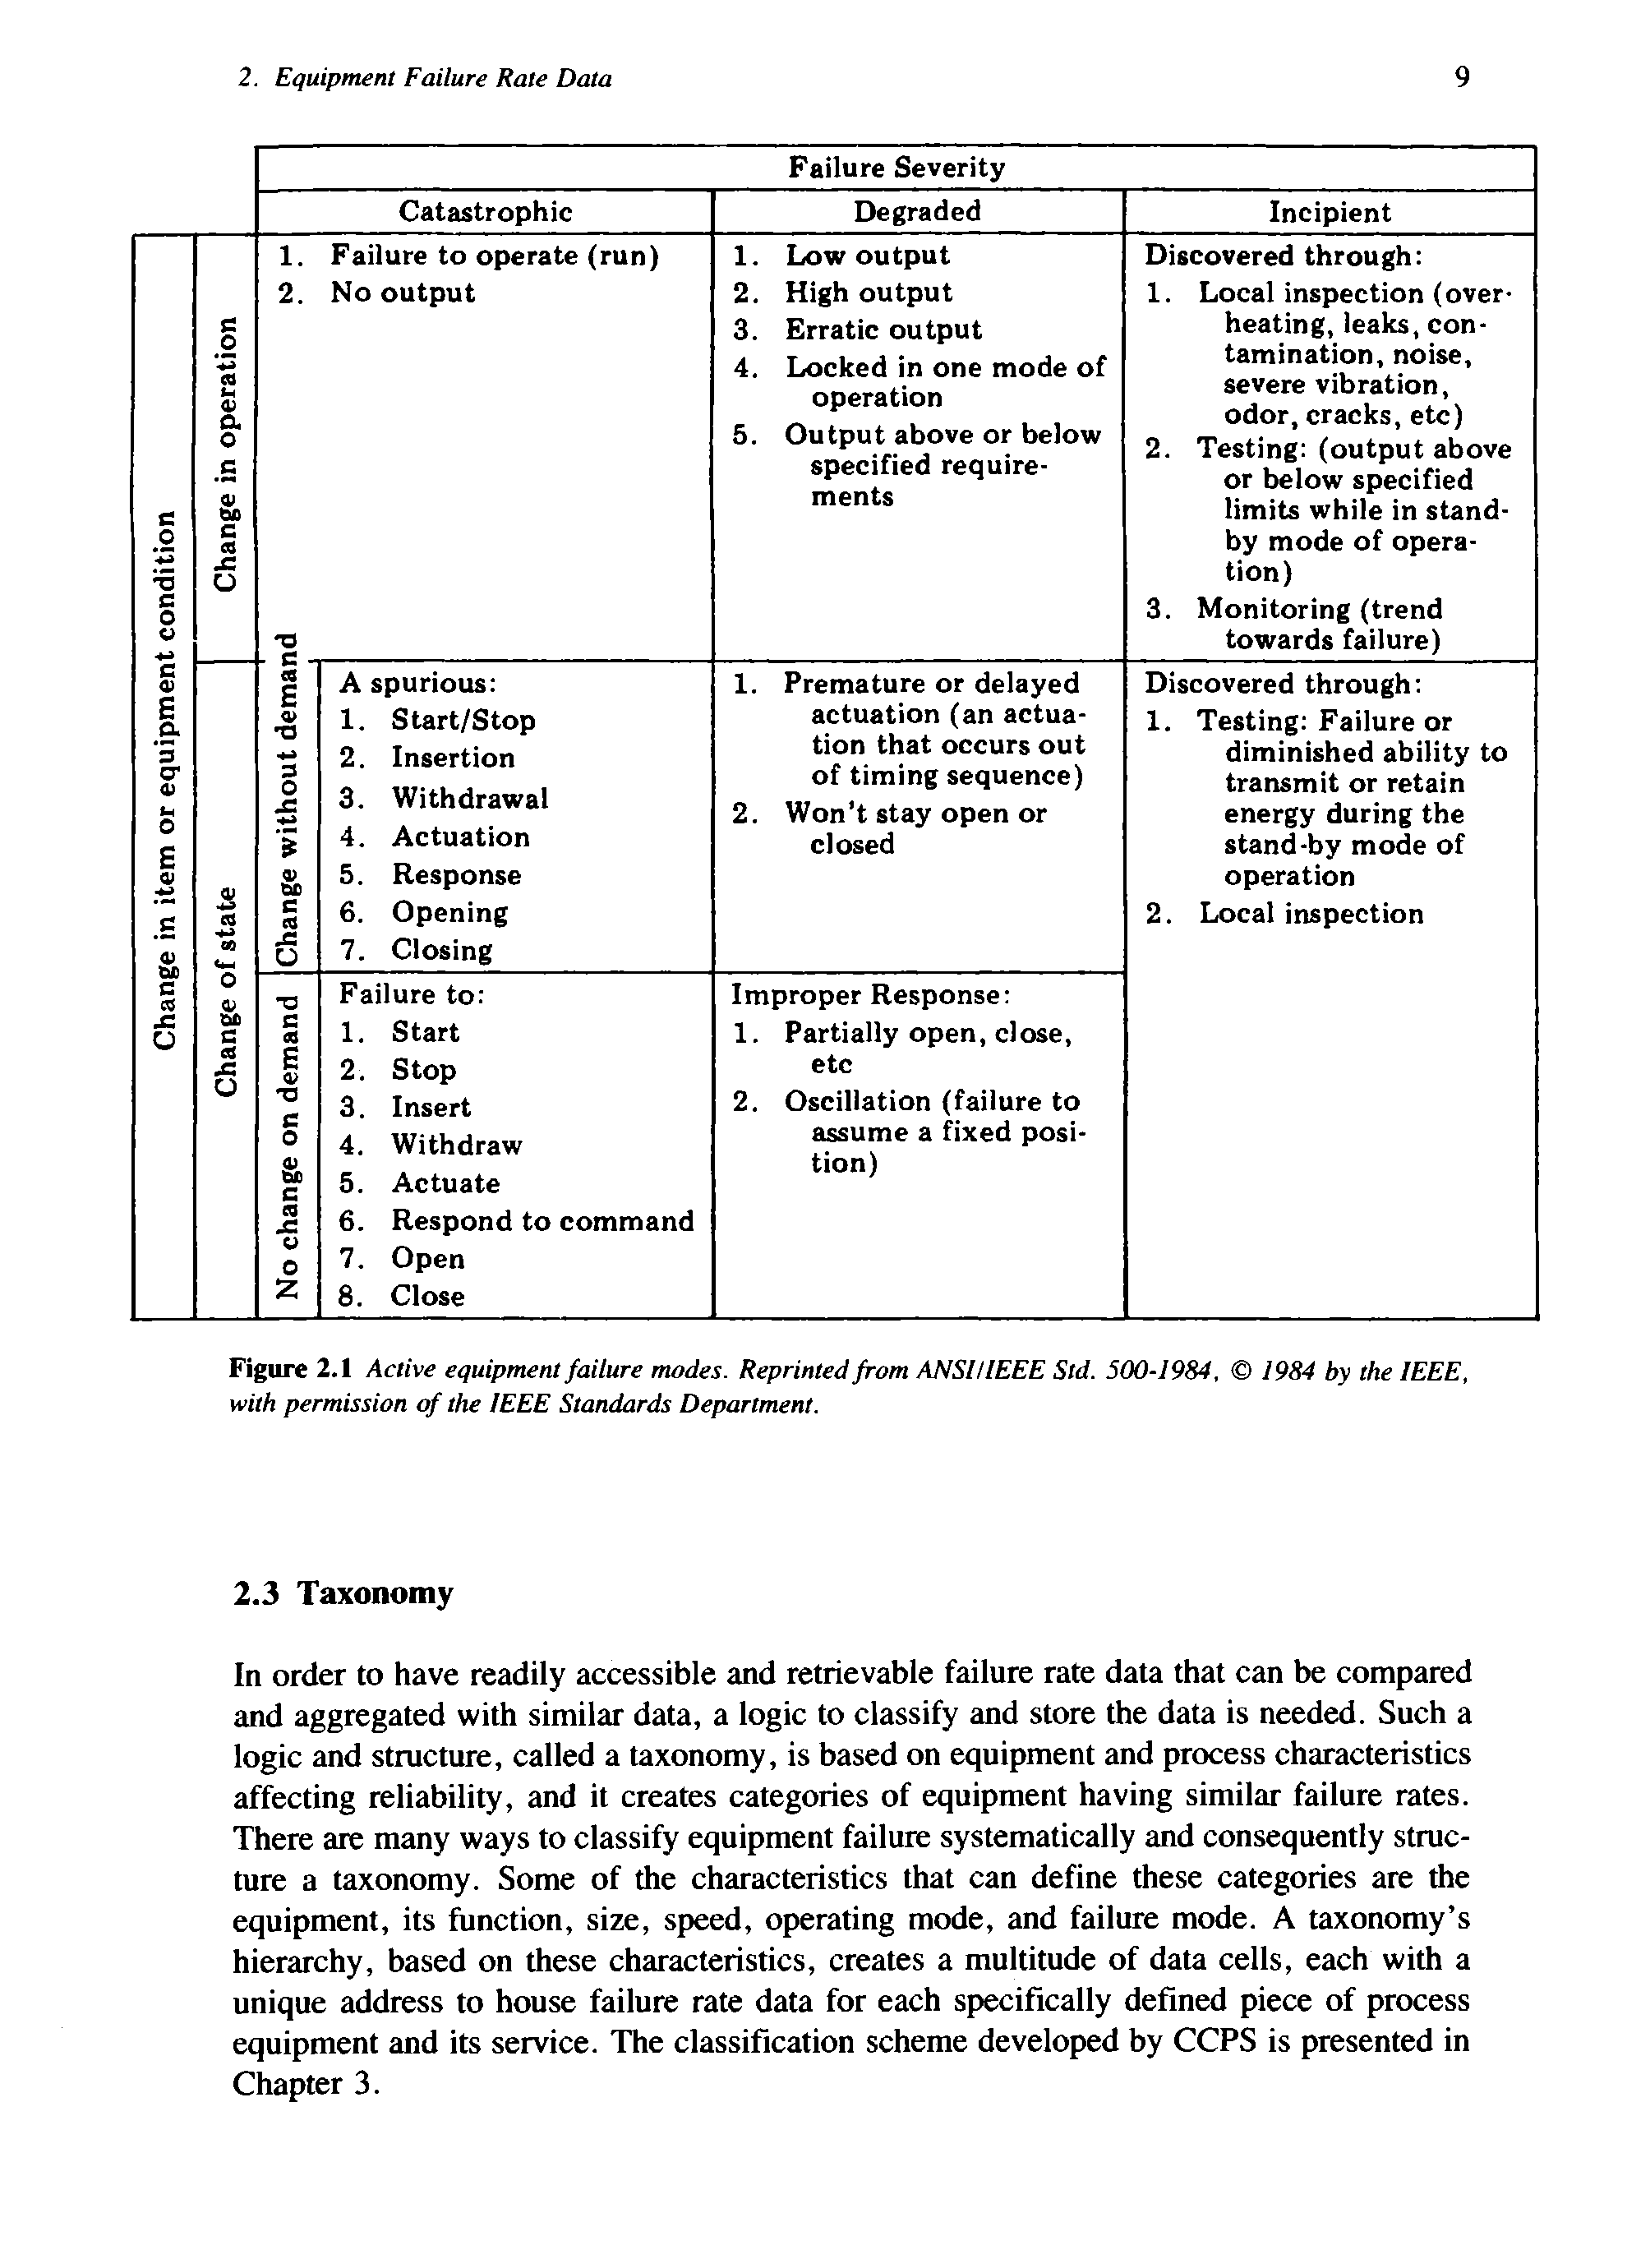 Figure 2.1 Active equipment failure modes. Reprinted from ANSI IEEE Std. 500-1984, with permission of the IEEE Standards Department.